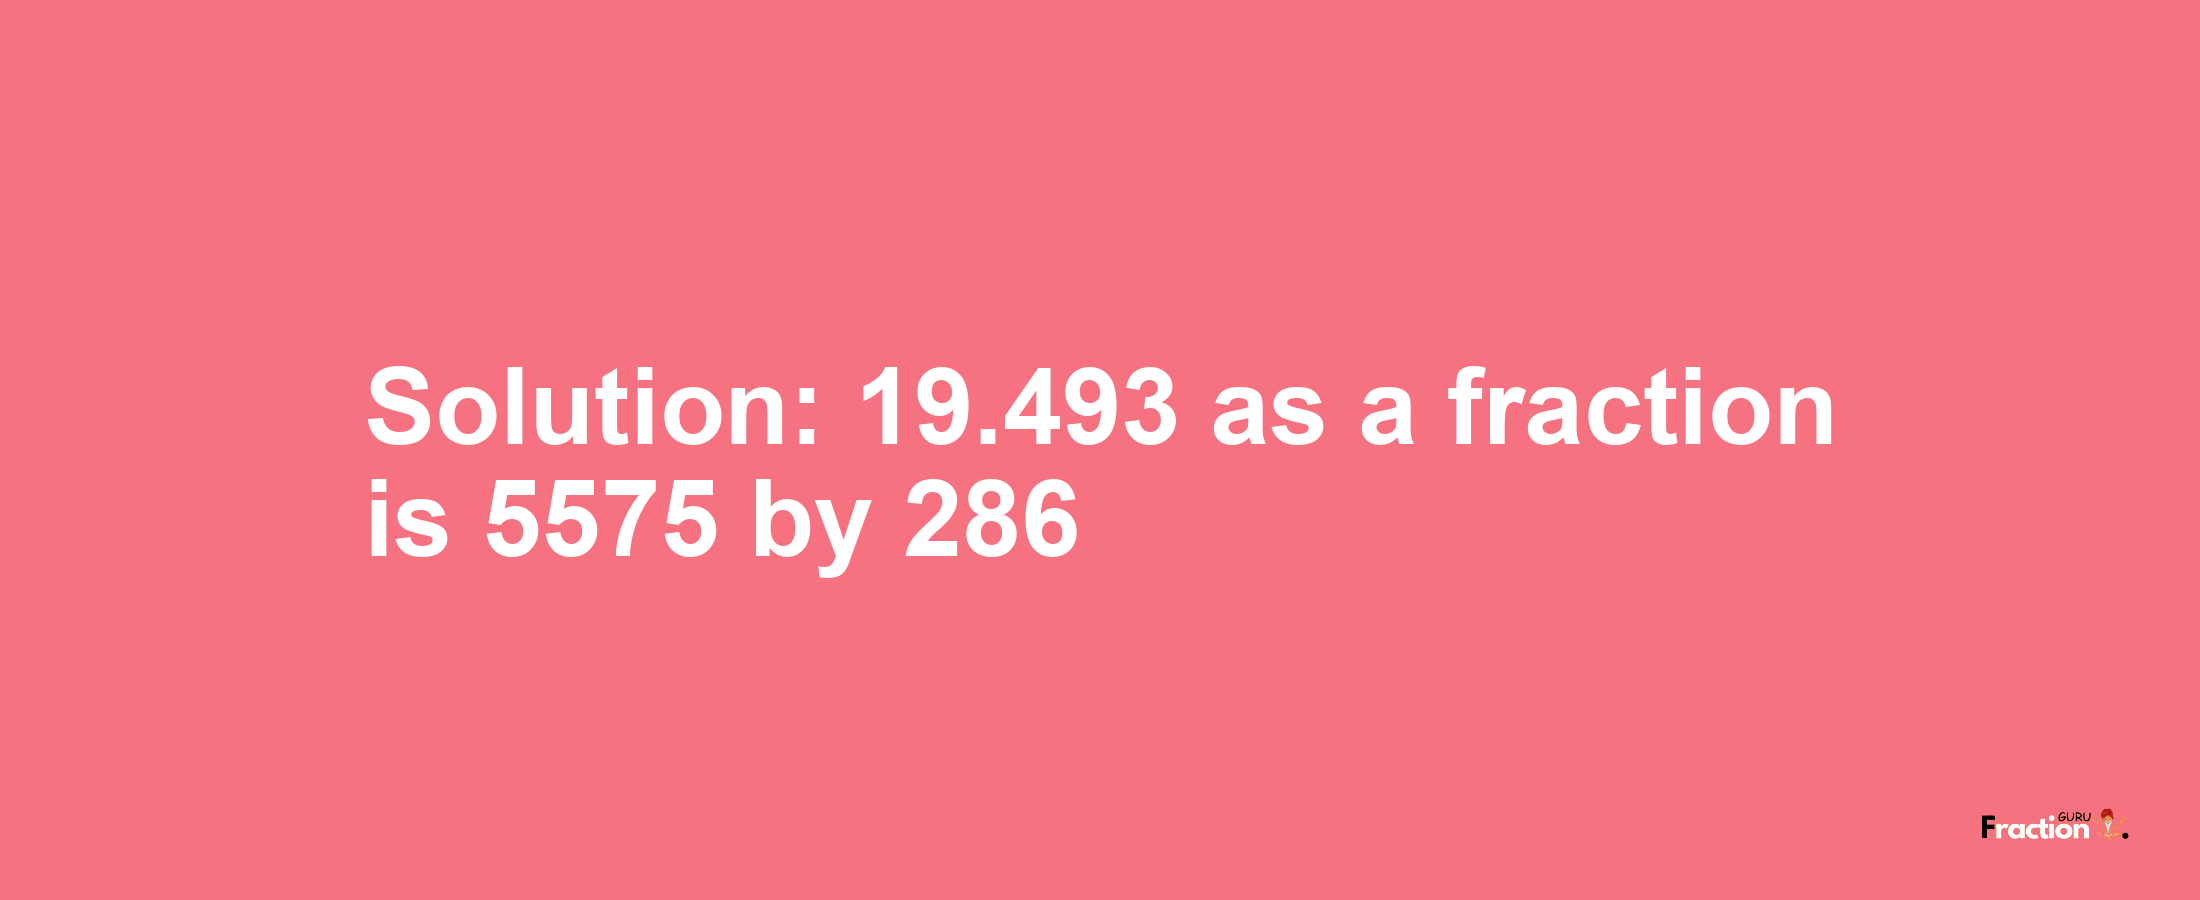 Solution:19.493 as a fraction is 5575/286